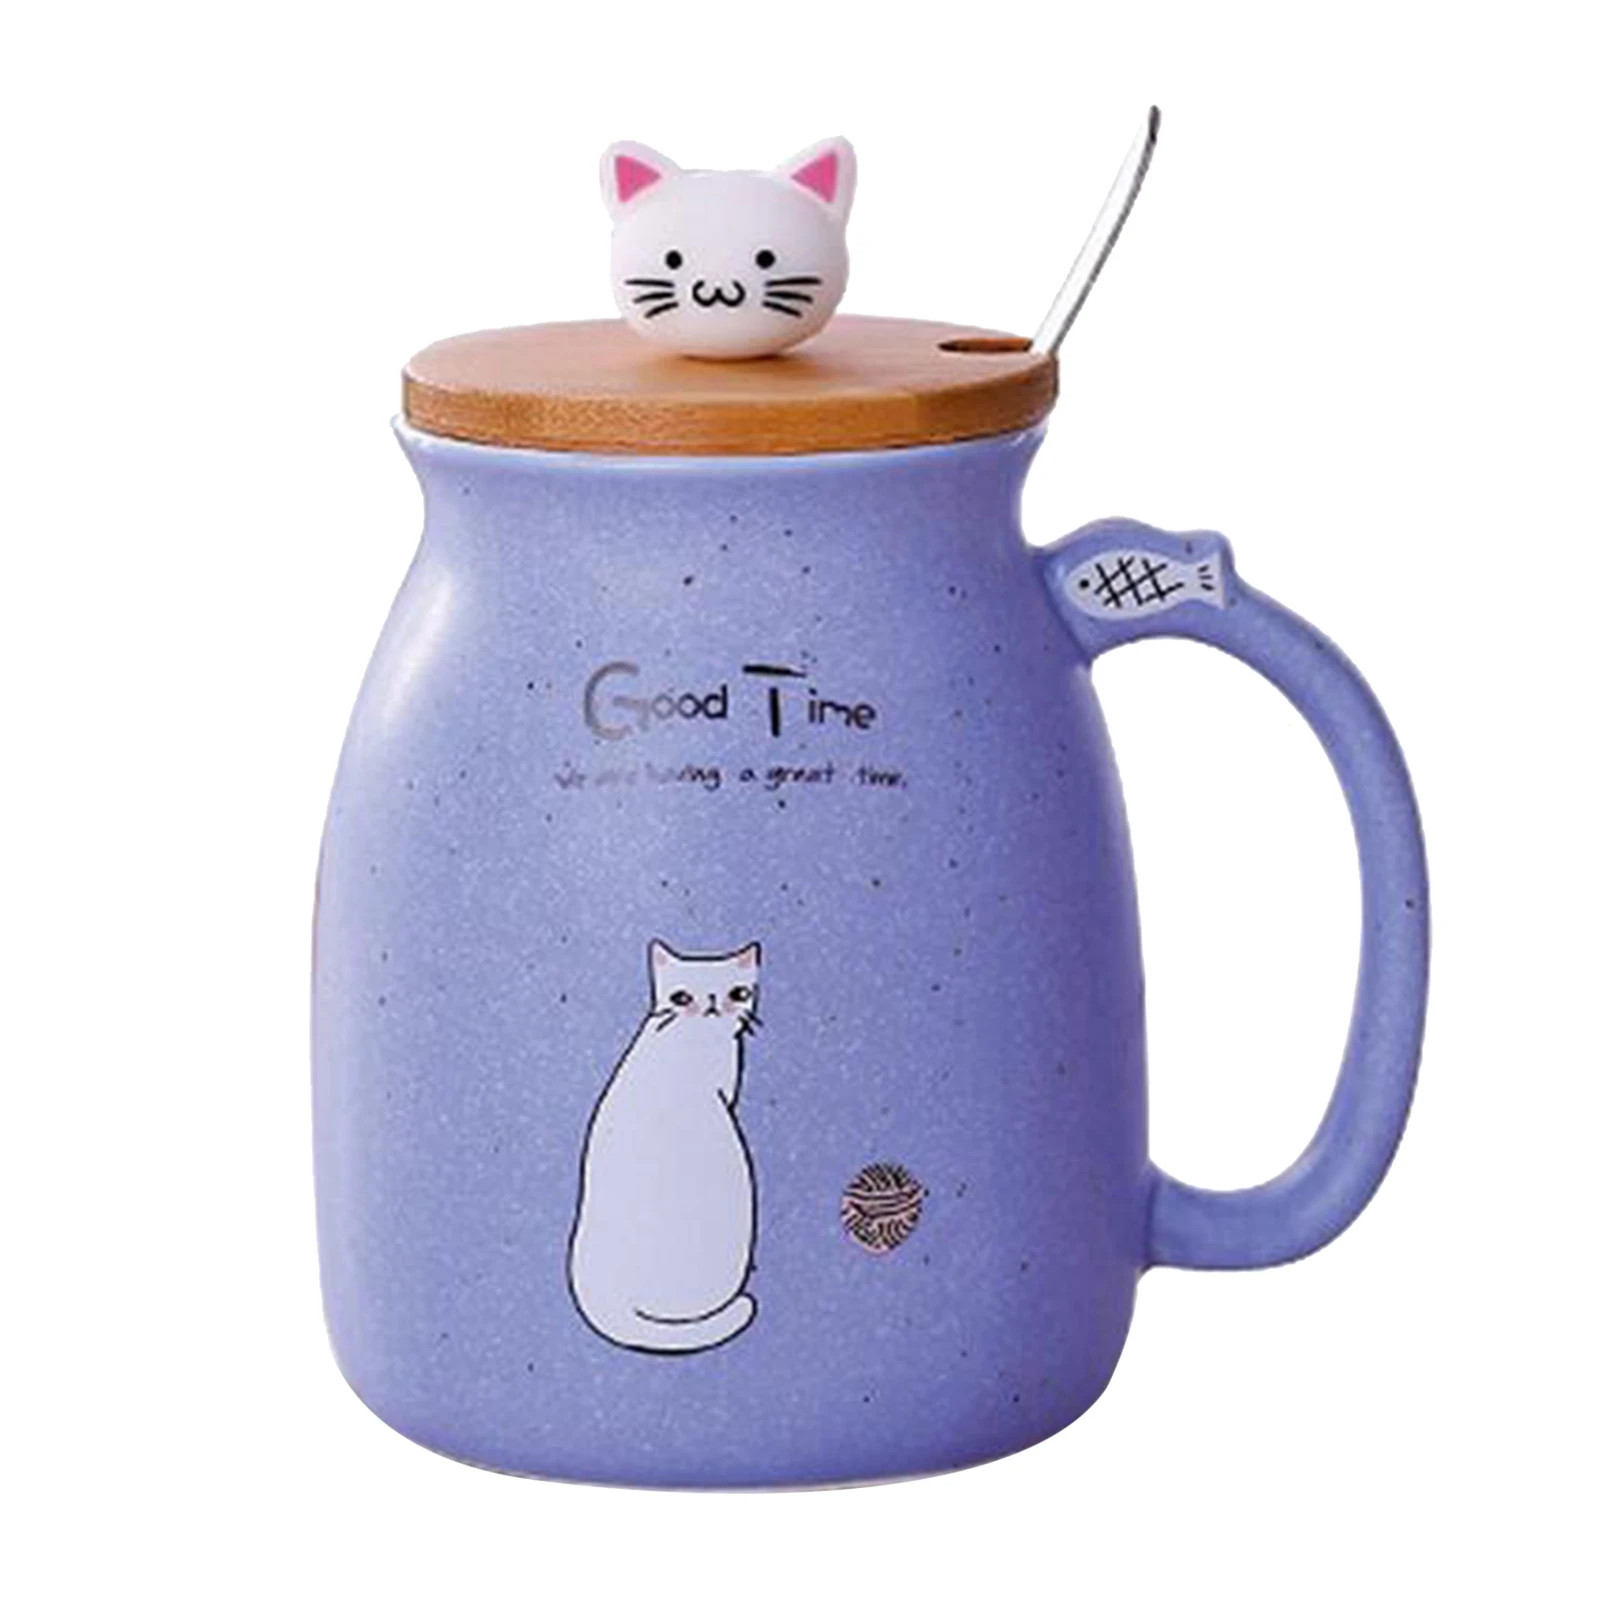 Cute Cat Ceramic Cup Hot Cold Tea Cup Milk Coffee Mug with Spoon Lid Pink